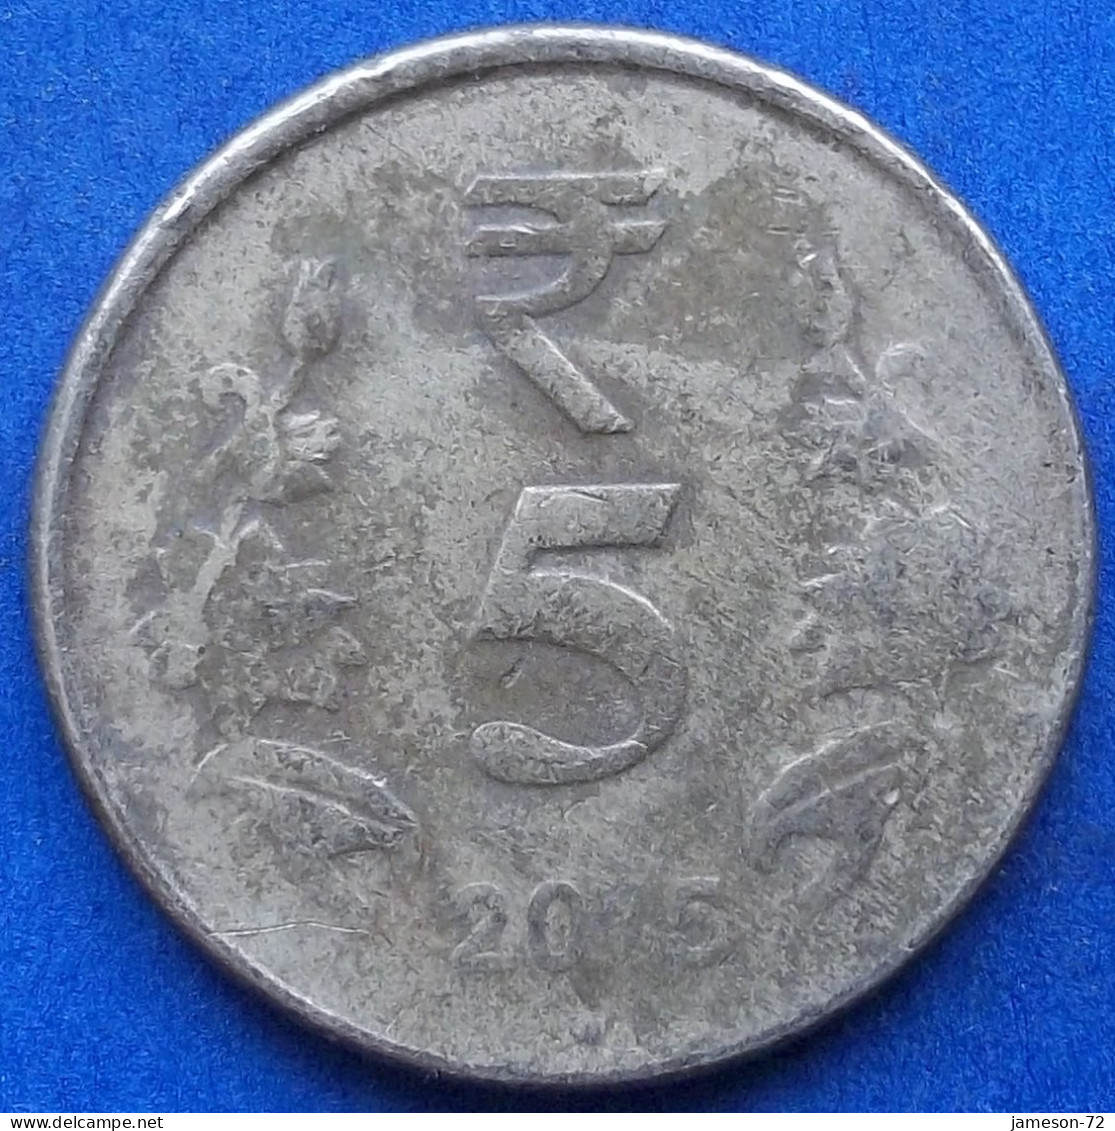 INDIA - 5 Rupees 2015 "Lotus Flowers" KM# 399.1 Republic Decimal Coinage (1957) - Edelweiss Coins - Georgia